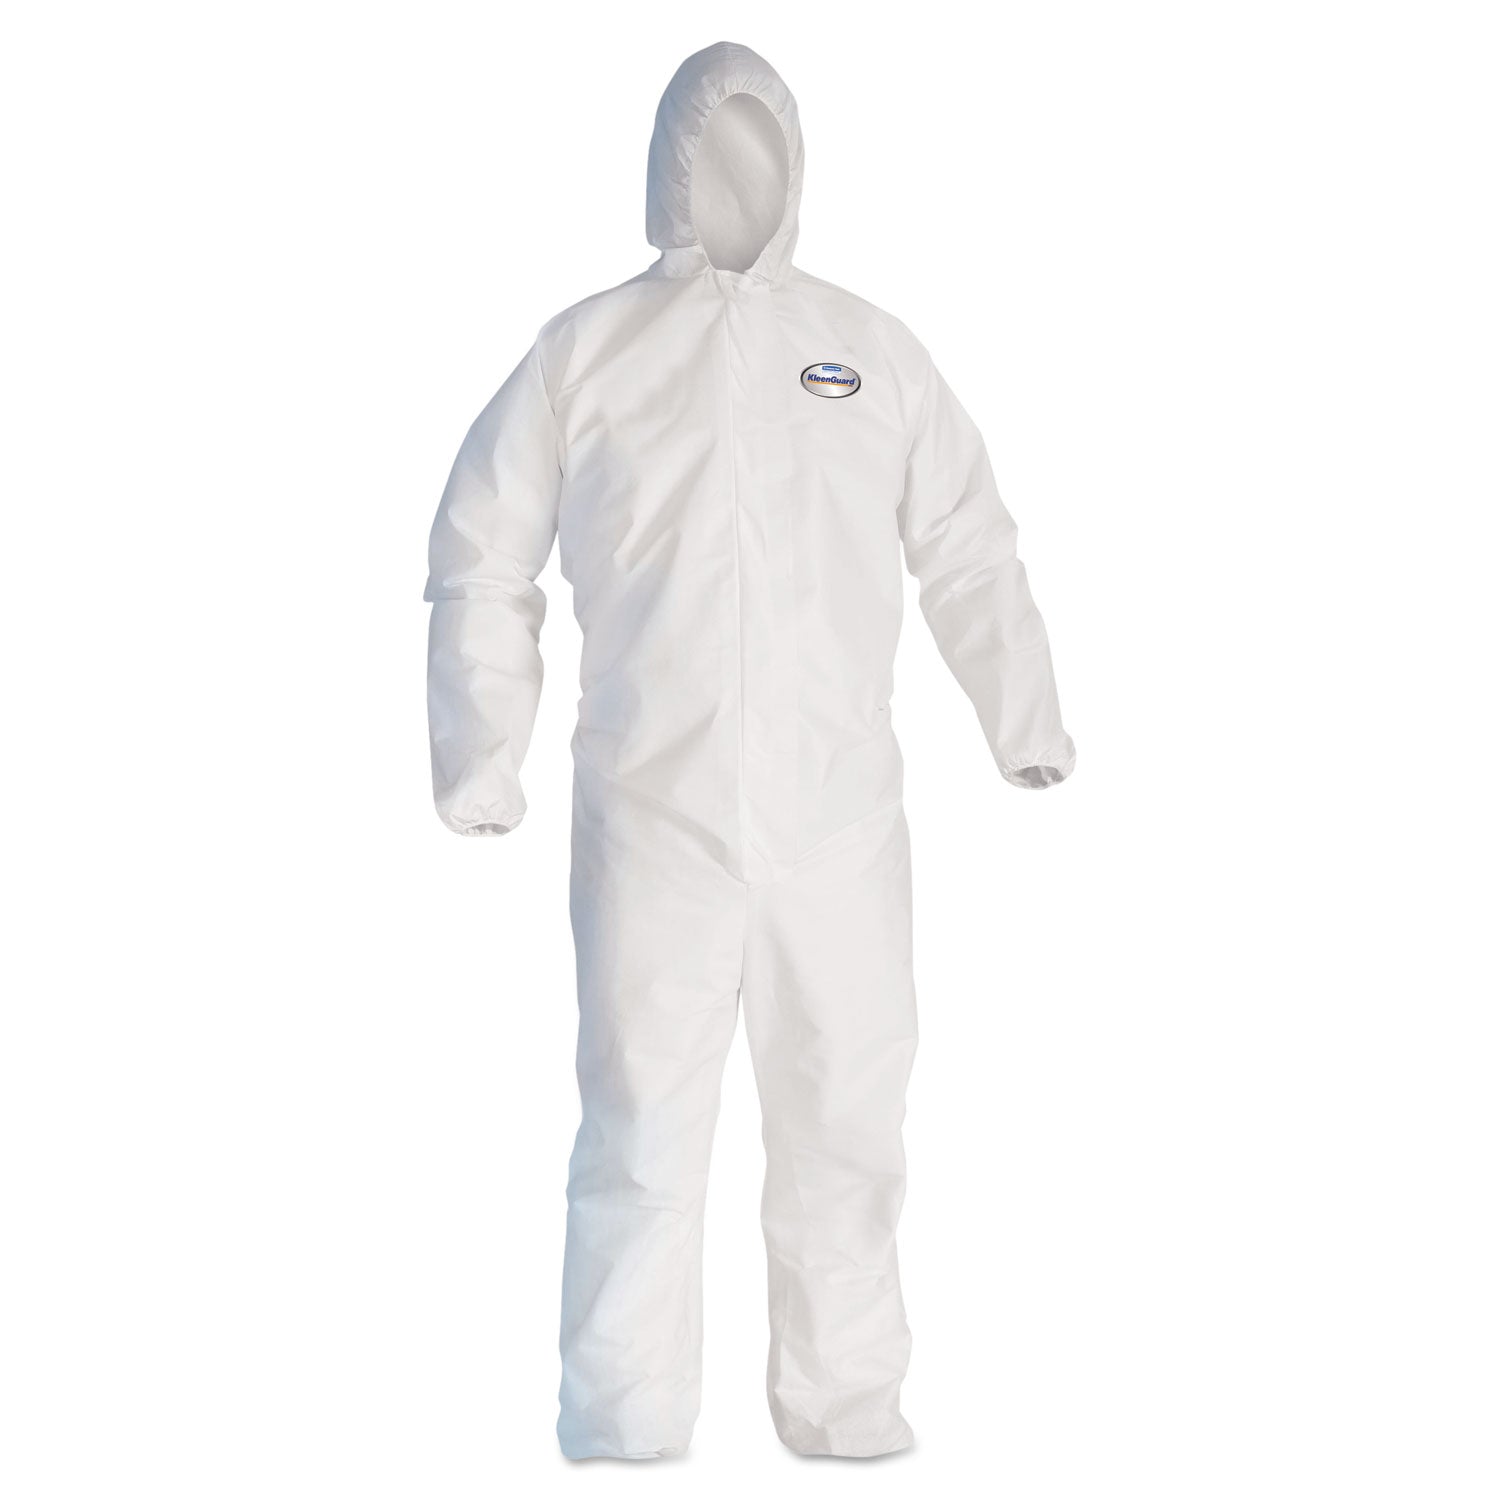 a30-elastic-back-and-cuff-hooded-coveralls-large-white-25-carton_kcc46113 - 1